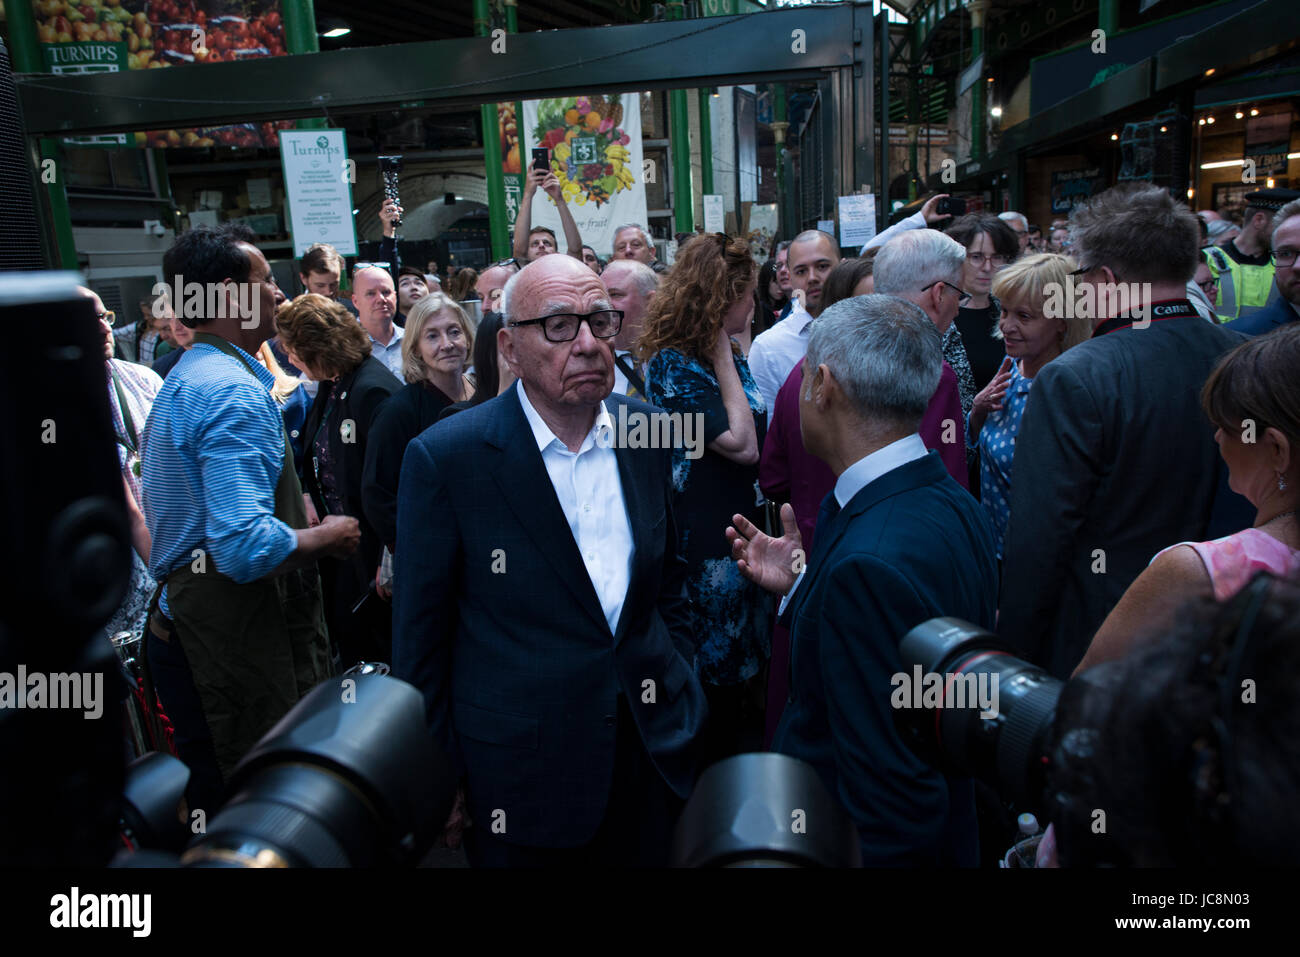 Borough Market, London, UK. 14th Apr, 2017. Borough Market has officially re-opened, following last weeks terrorist attack, which left 8 people dead and 48 injured within the vicinity. In picture, A distant looking Rupert Murdoch speaks with London Mayor Sadiq Khan. Credit: Byron Kirk/Alamy Live News Stock Photo